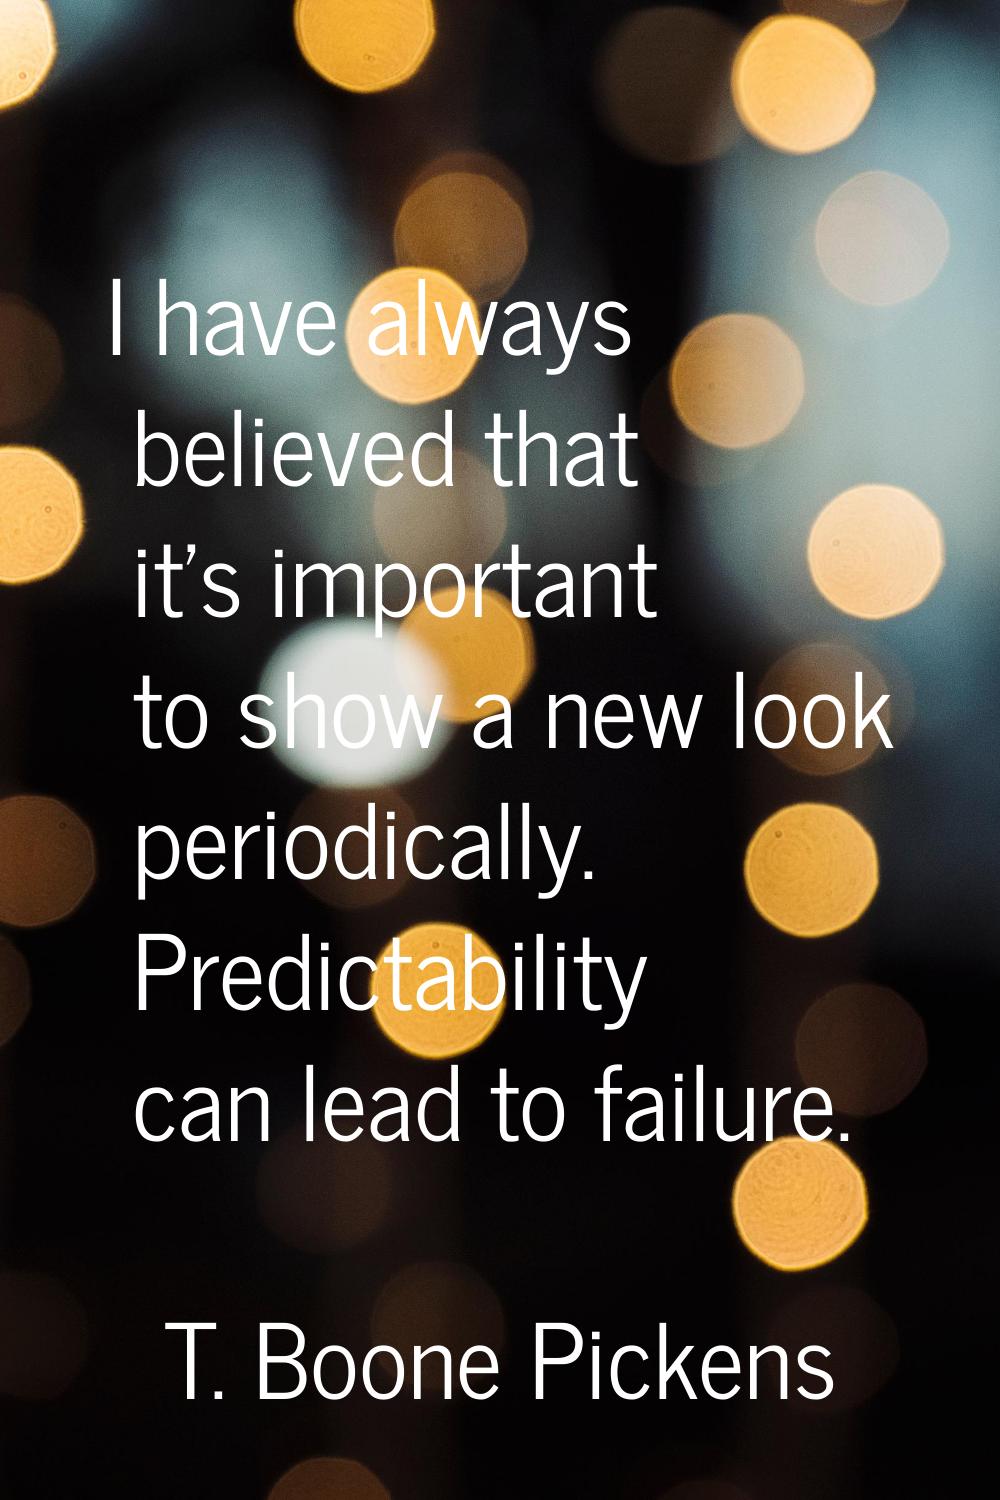 I have always believed that it's important to show a new look periodically. Predictability can lead